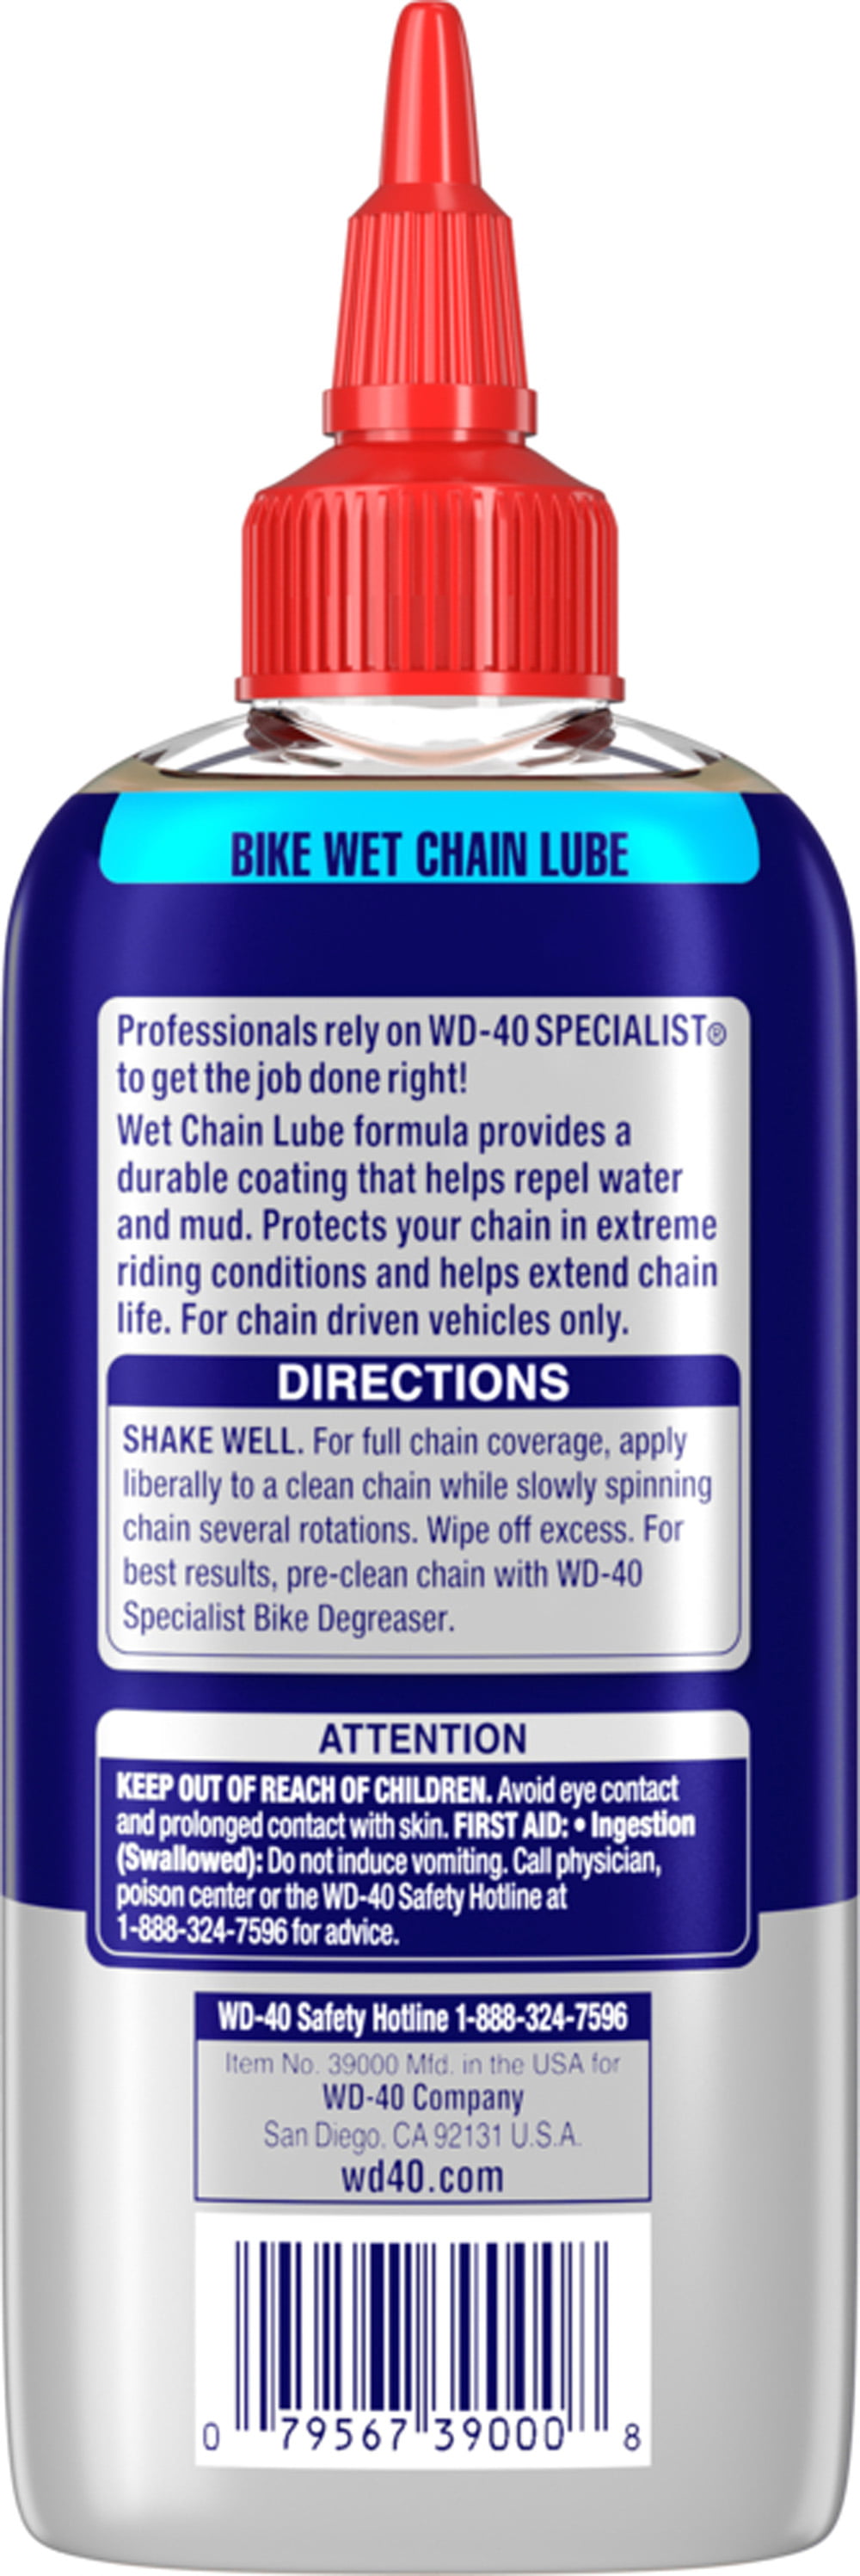 Chain lube, is it a complete waste of money? - General Dirt Bike Discussion  - ThumperTalk